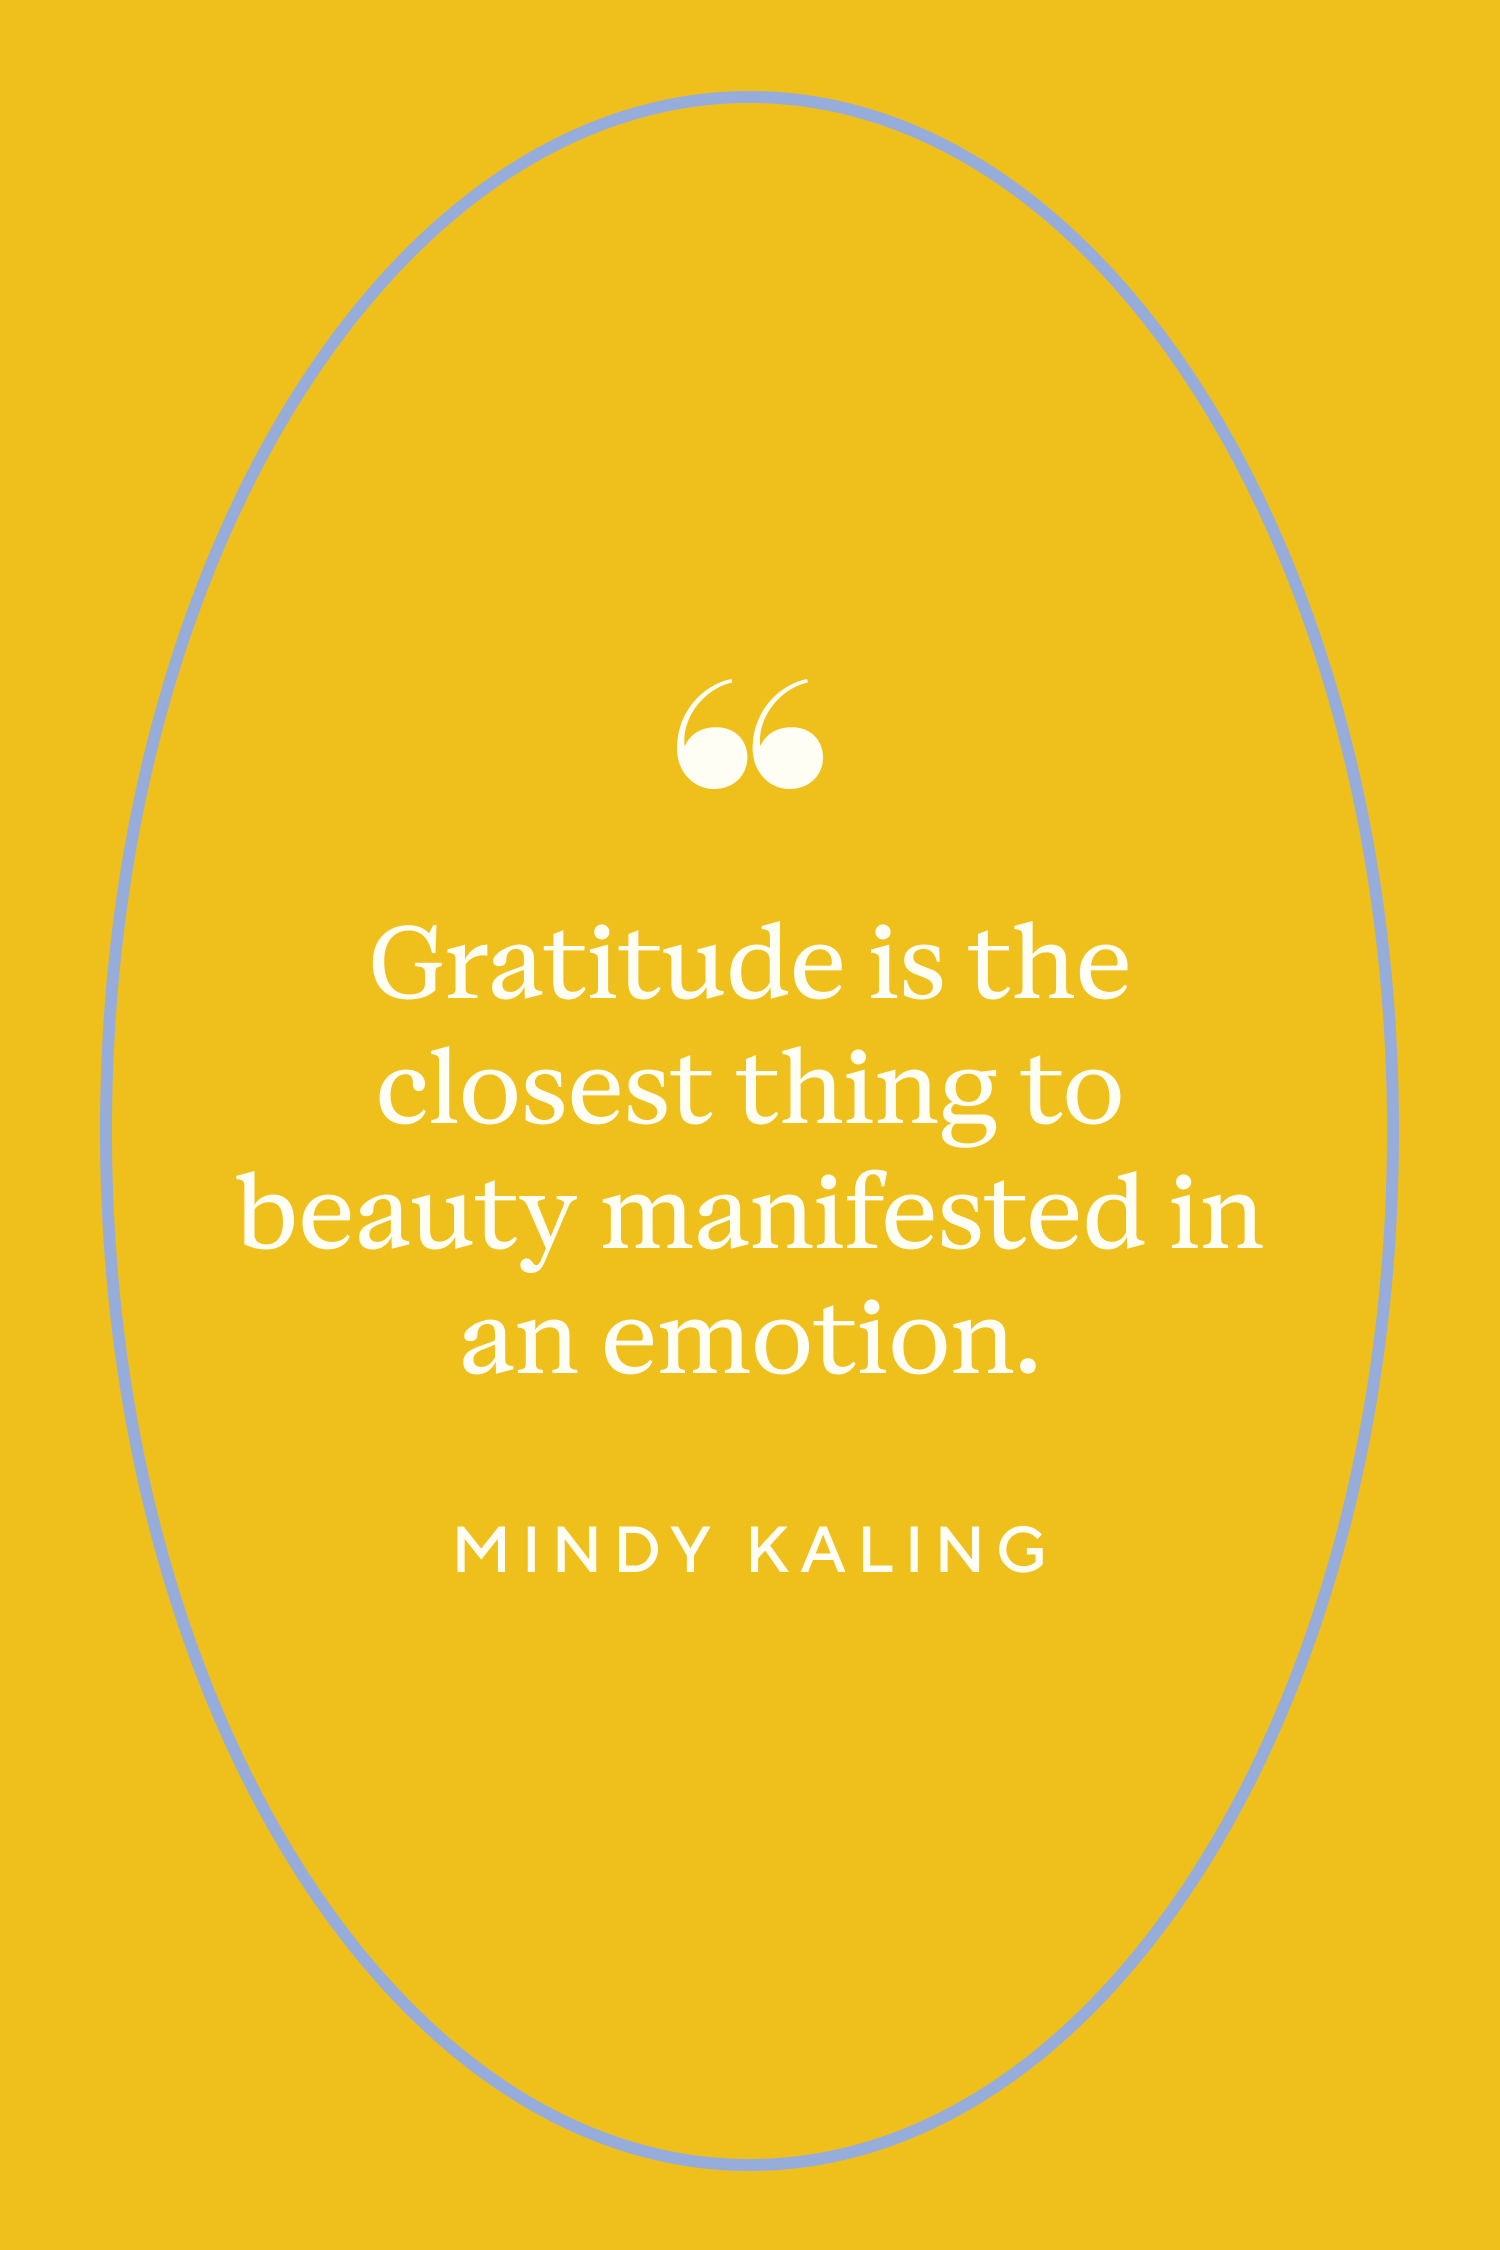 Gratitude is a Must!